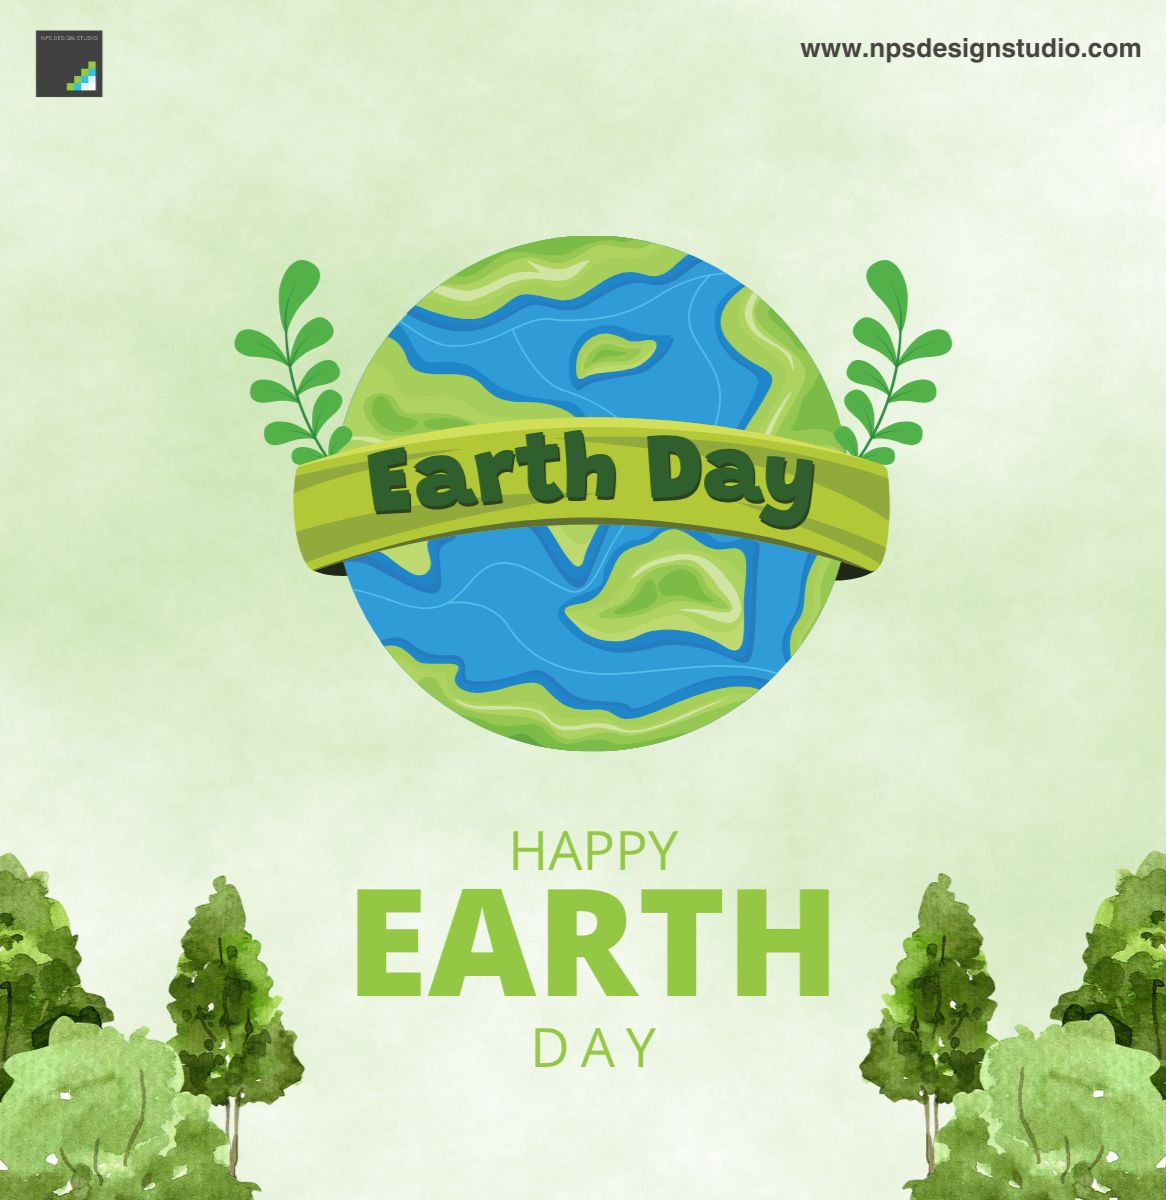 On Earth Day today, let's take a moment to appreciate the unparalleled beauty our planet offers. At NPS Design Studio, we're inspired by nature's masterpiece in every design we create. Lets cherish and protect our Earth's precious gifts. #EarthDay#InspiredByNature#NPSDesignStudio